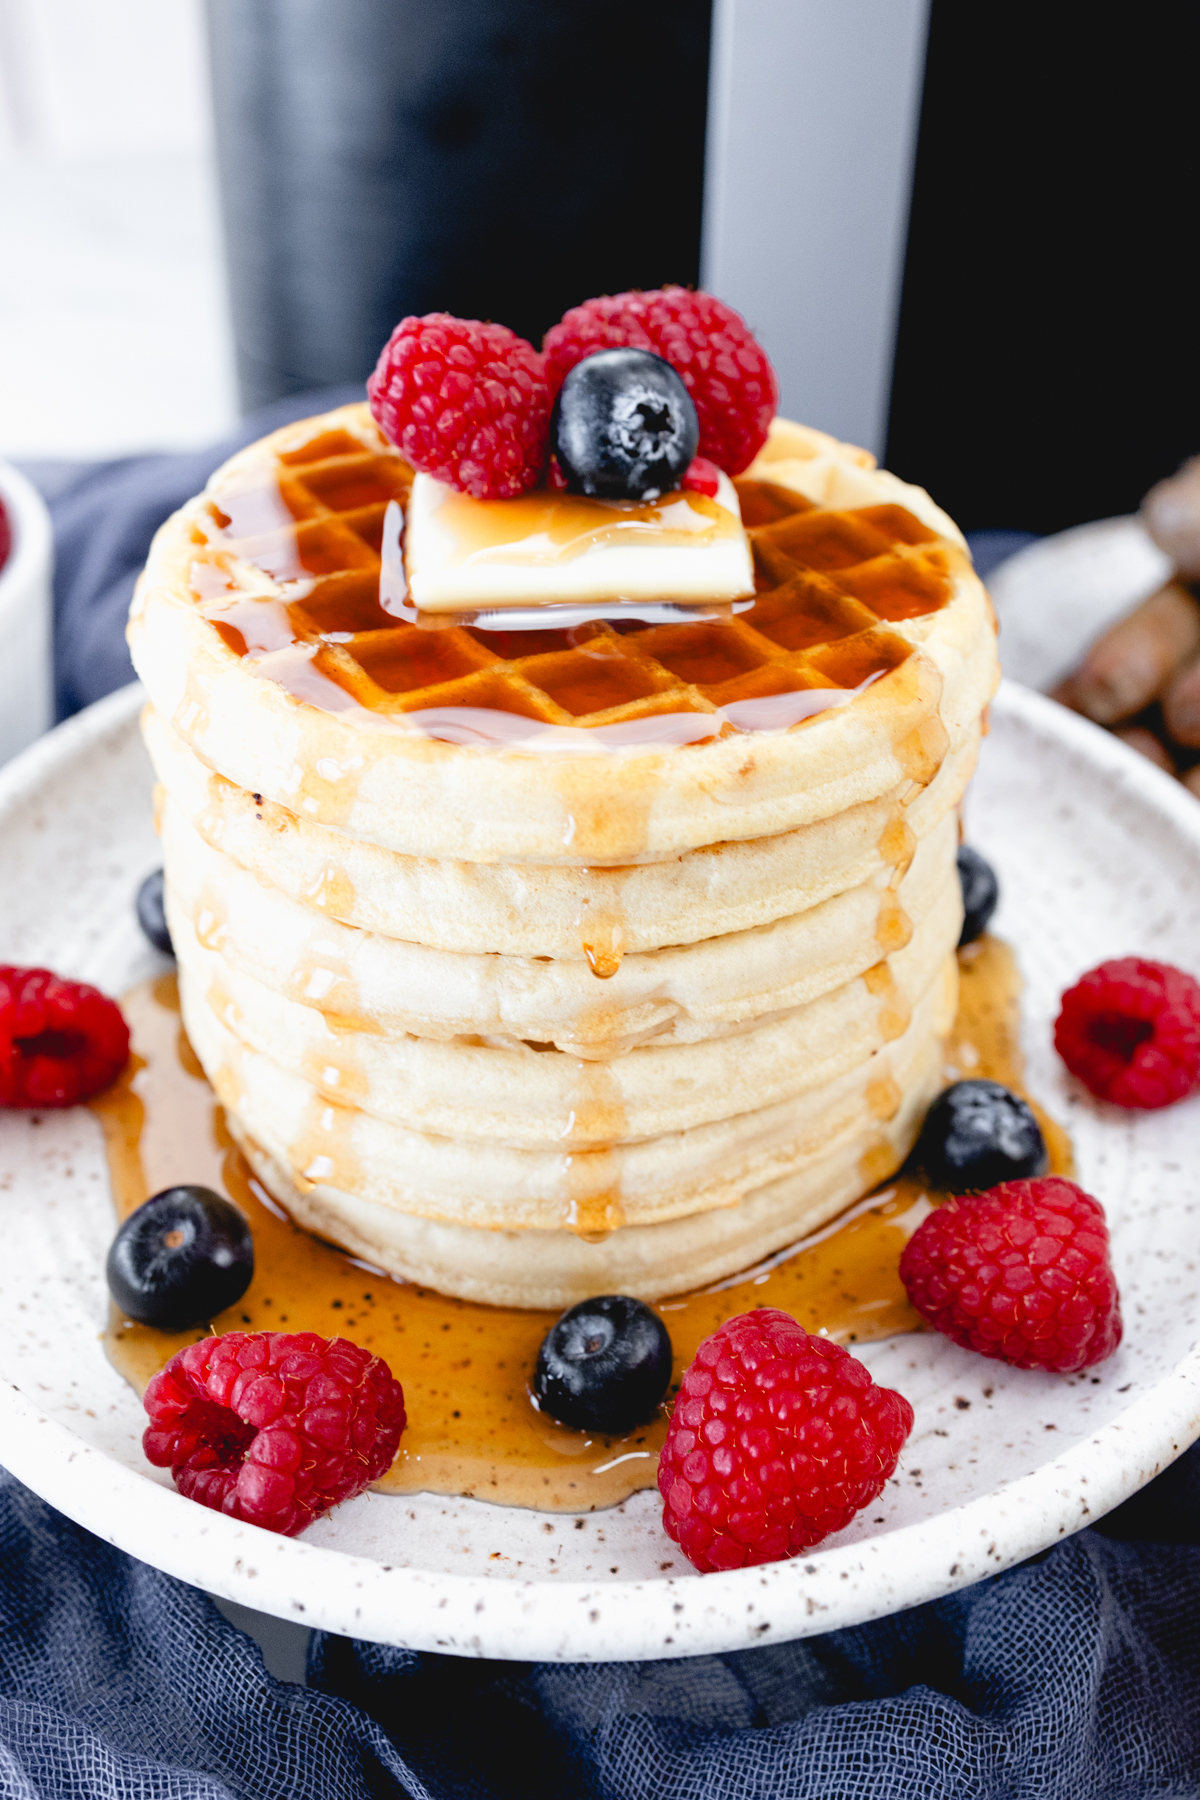 Close up view of a stack of waffles on a plate, topped with syrup, butter, and berries. Behind the plate is an air fryer.